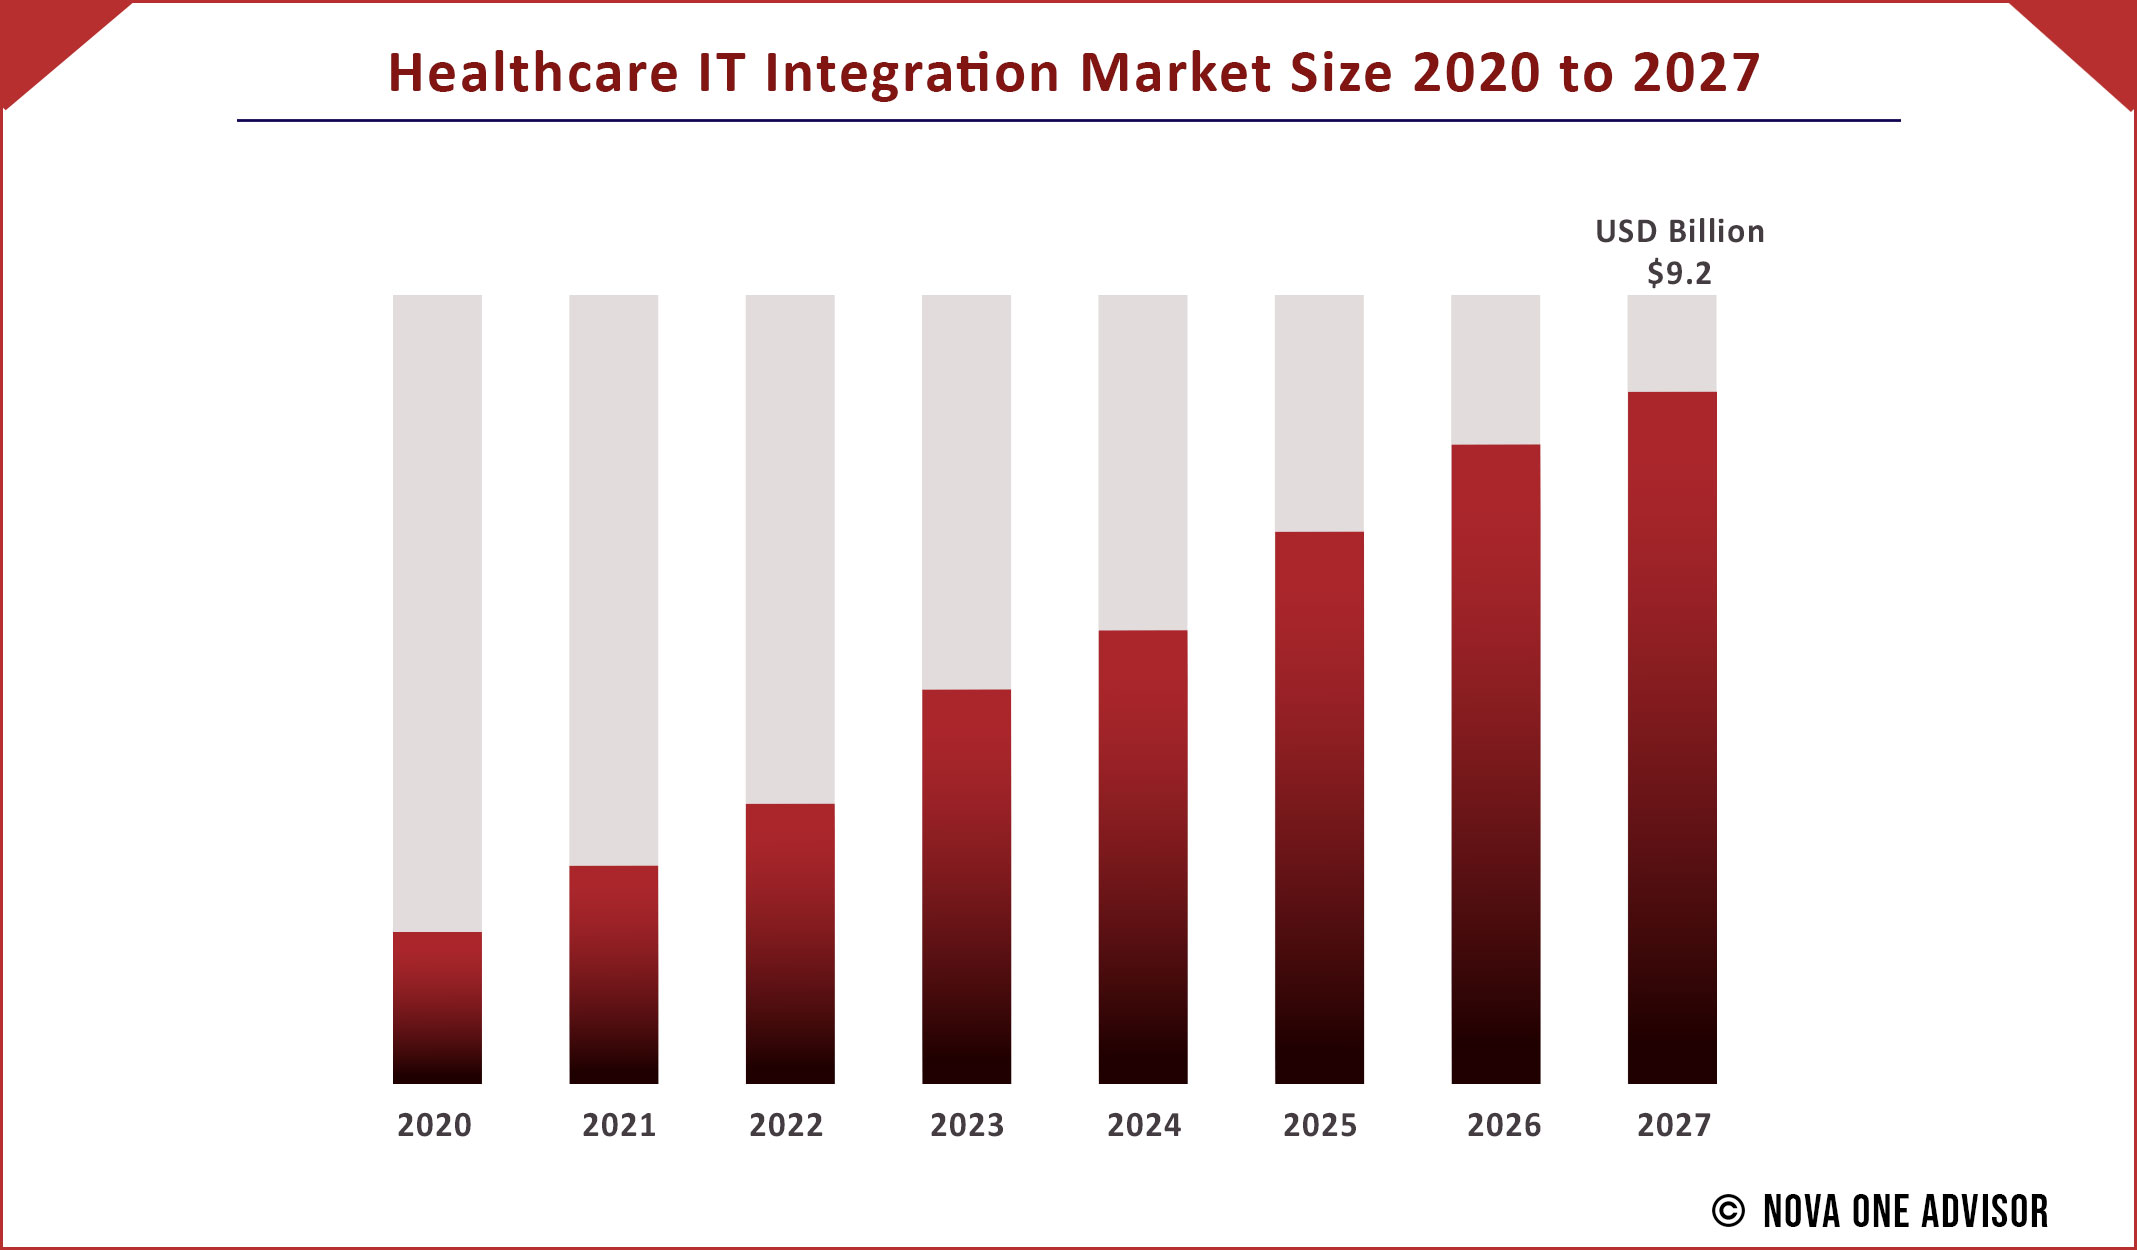 Healthcare IT Integration Market Size 2020 to 2027